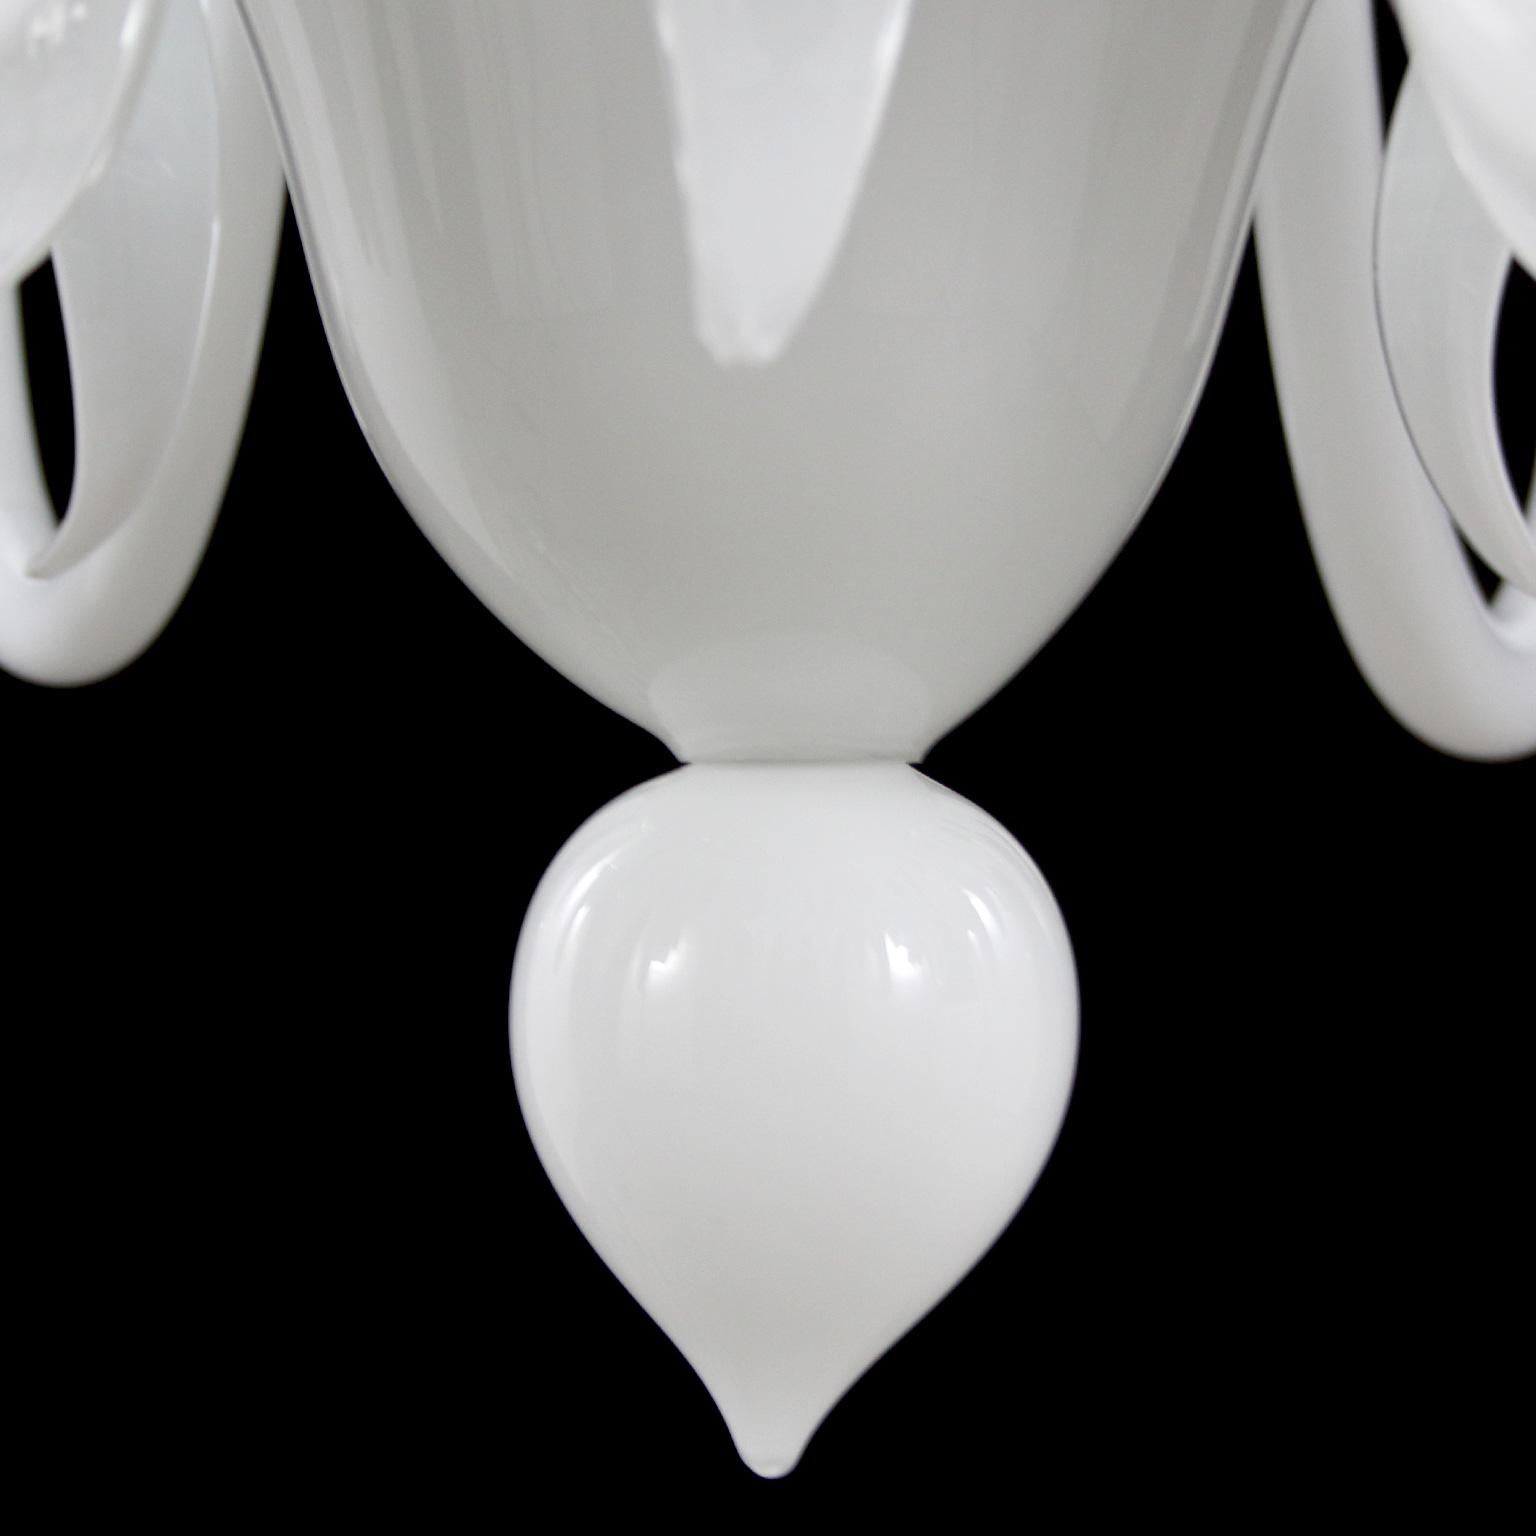 Natural Mood Chandelier 30 Arms White Murano Glass Swing 275 by Multiforme In New Condition For Sale In Trebaseleghe, IT